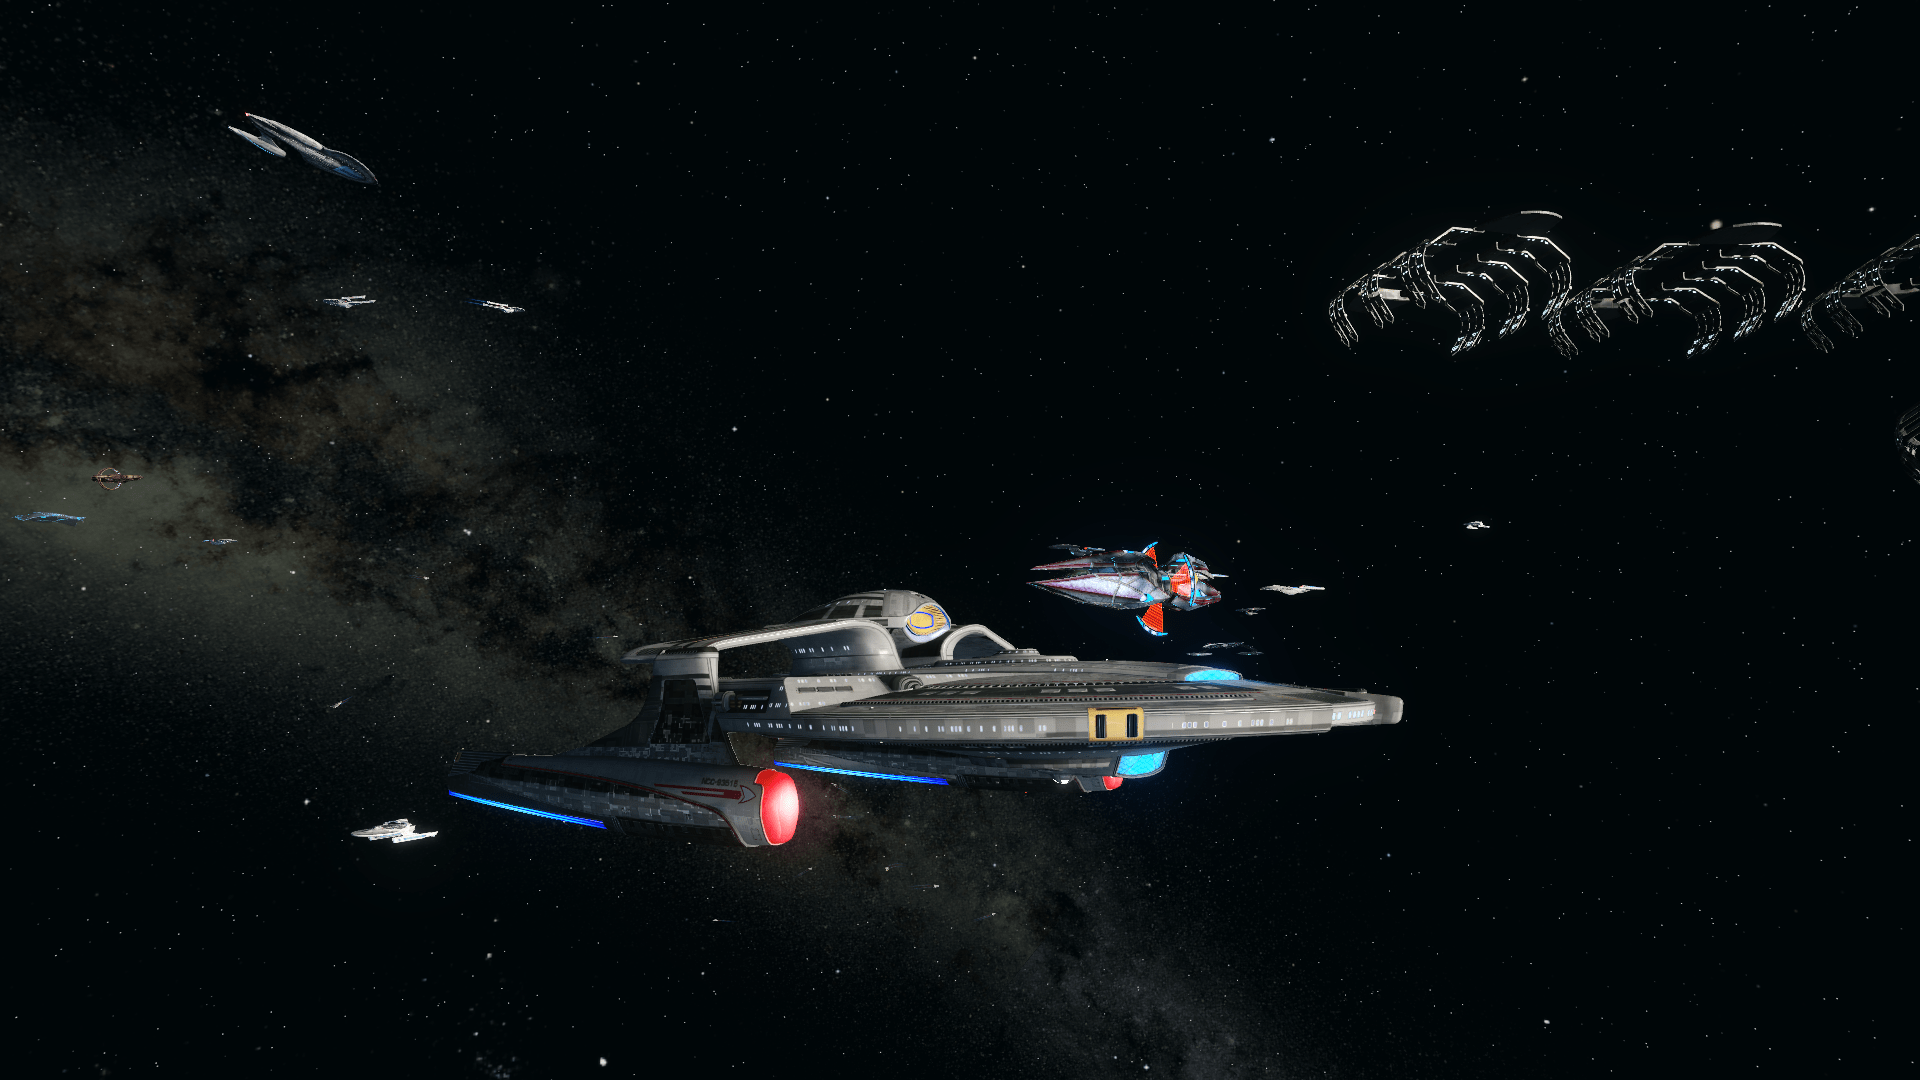 The original U.S.S. Astera in space with starships in the background.